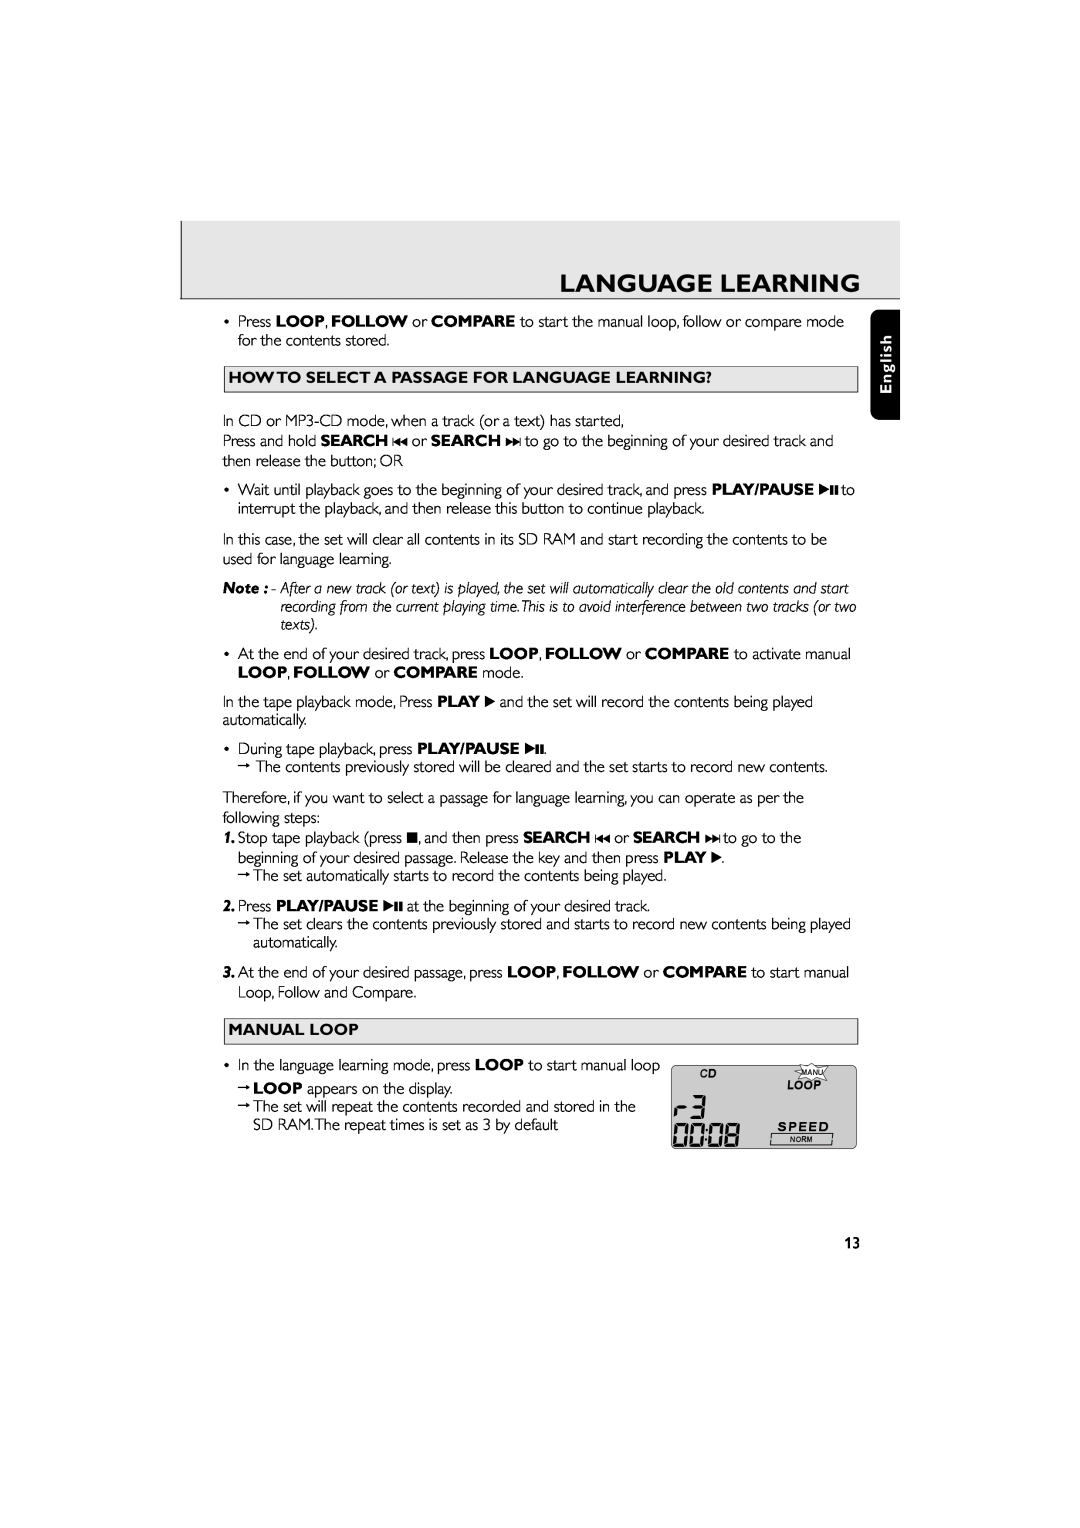 Philips AZ 6188 manual How To Select A Passage For Language Learning?, Manual Loop, English 